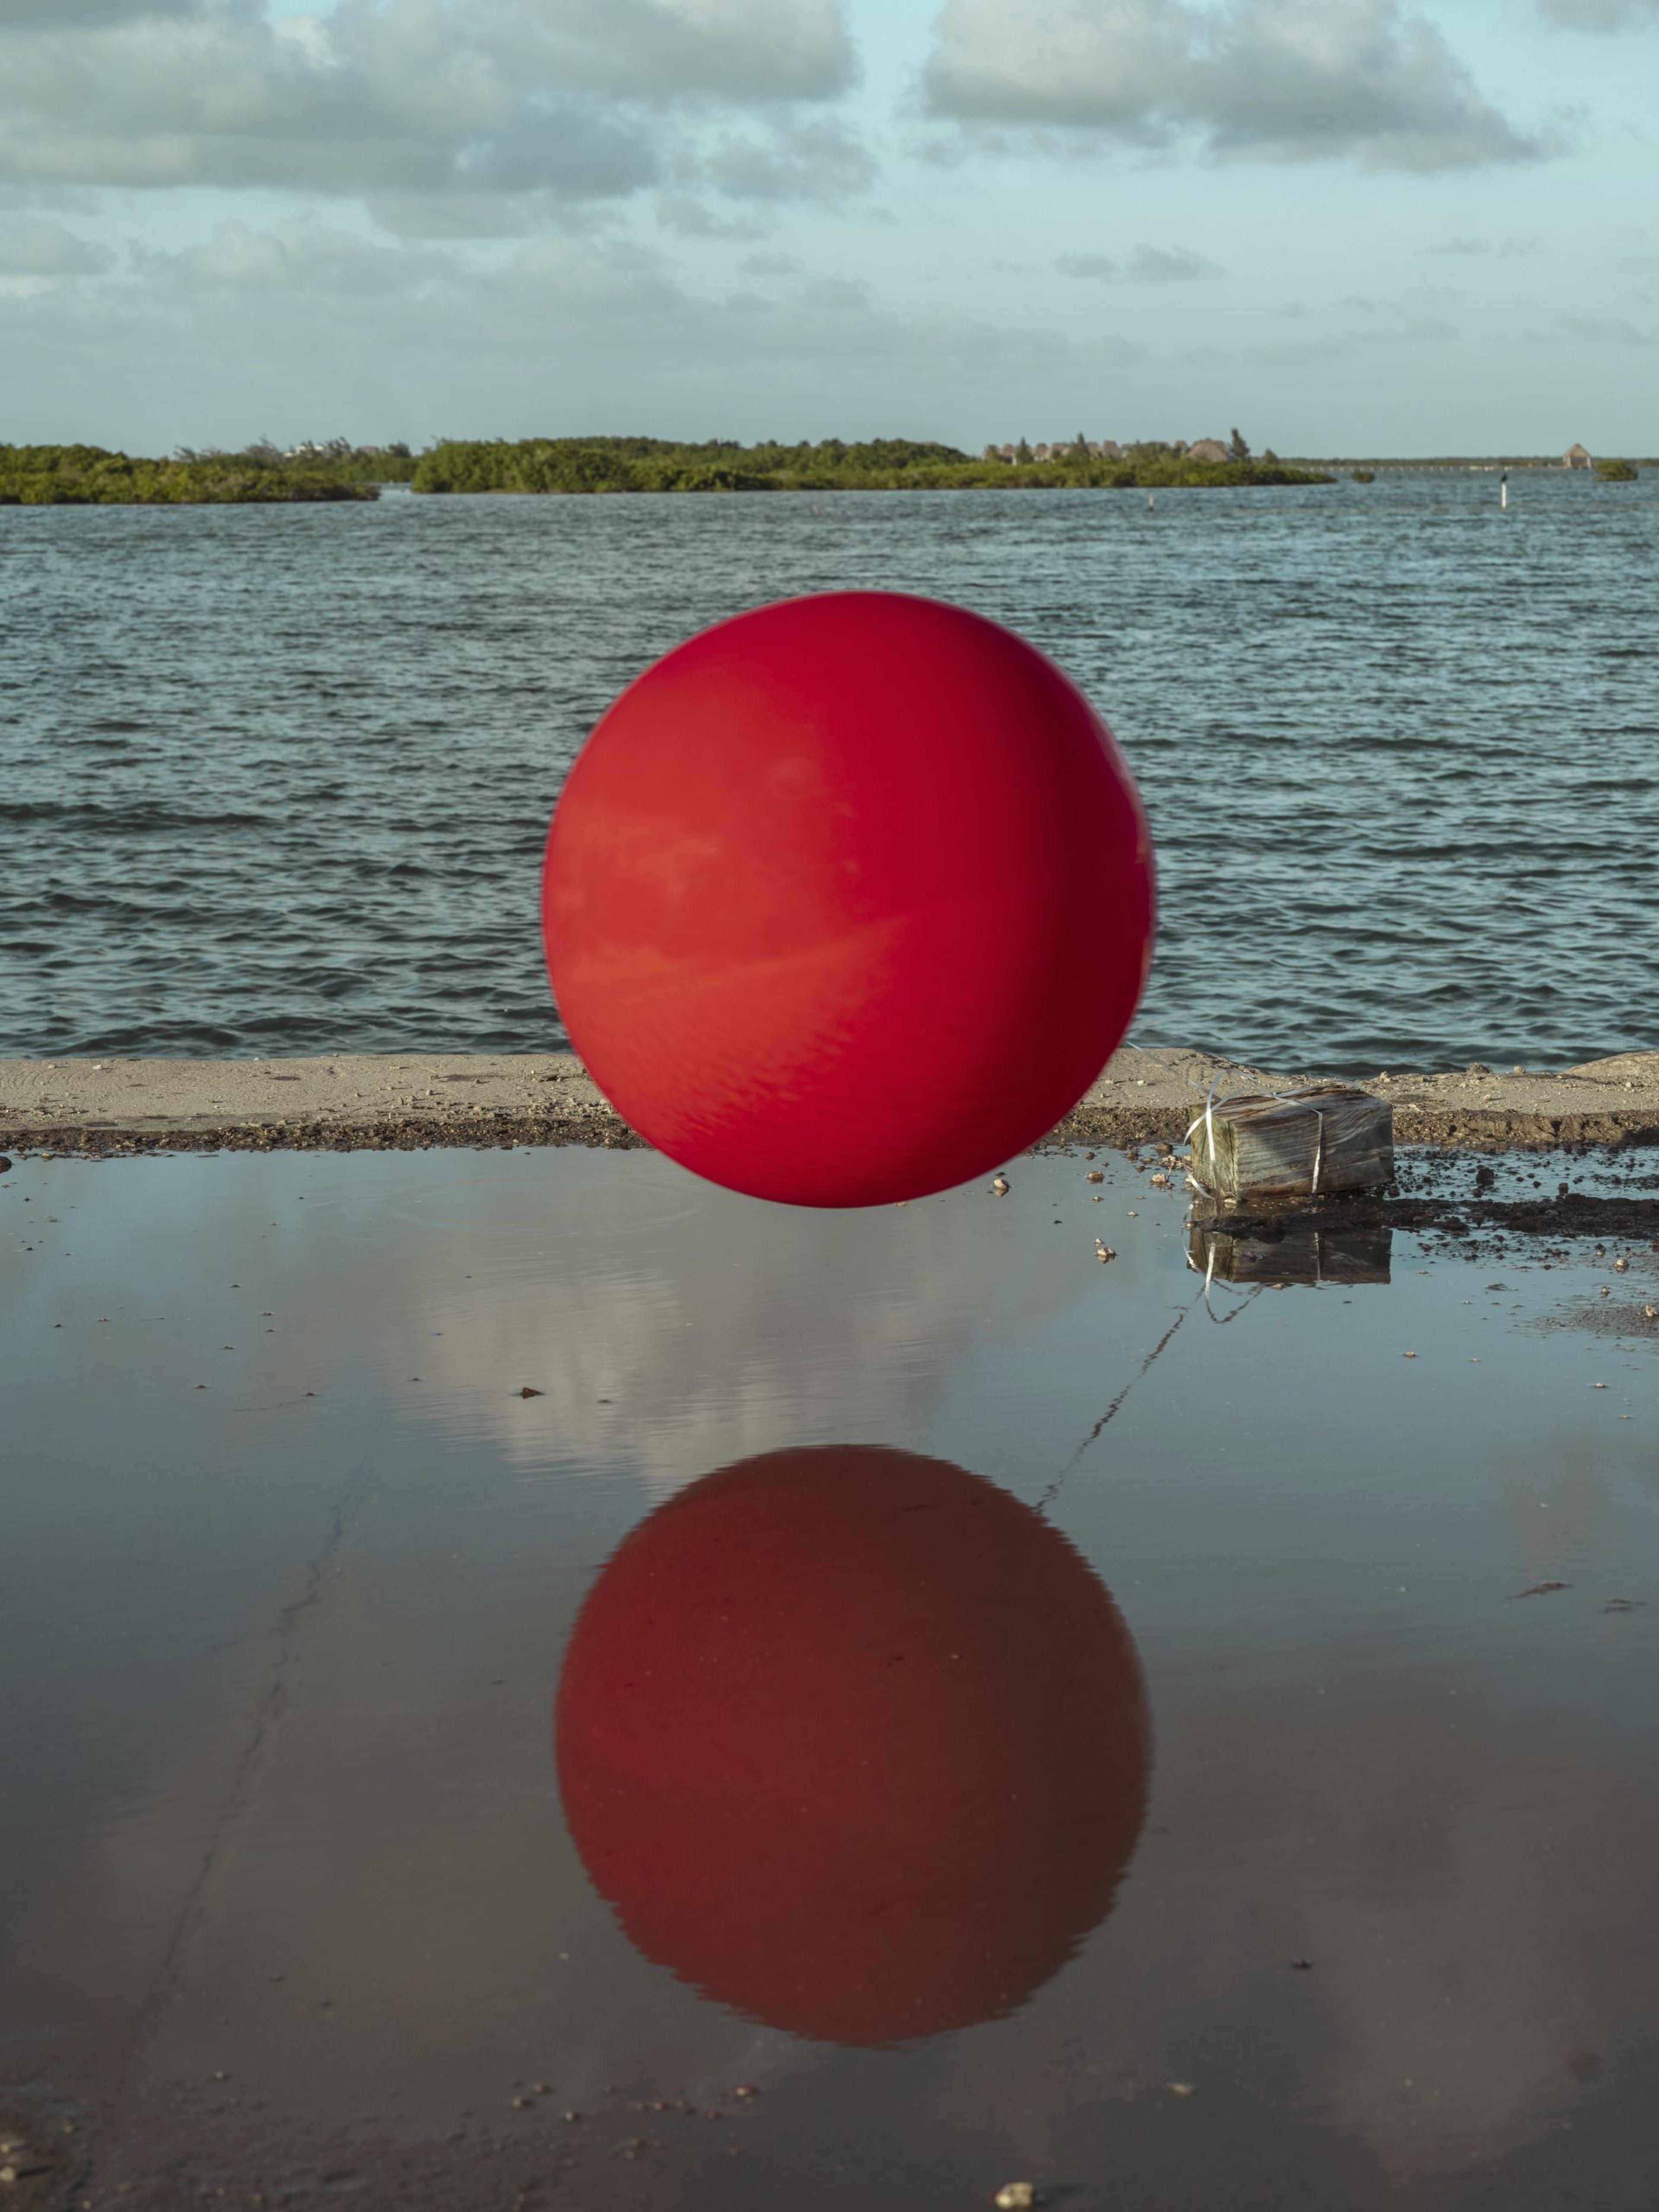 A photograph of a red sphere in the foreground with a body of water in the background.